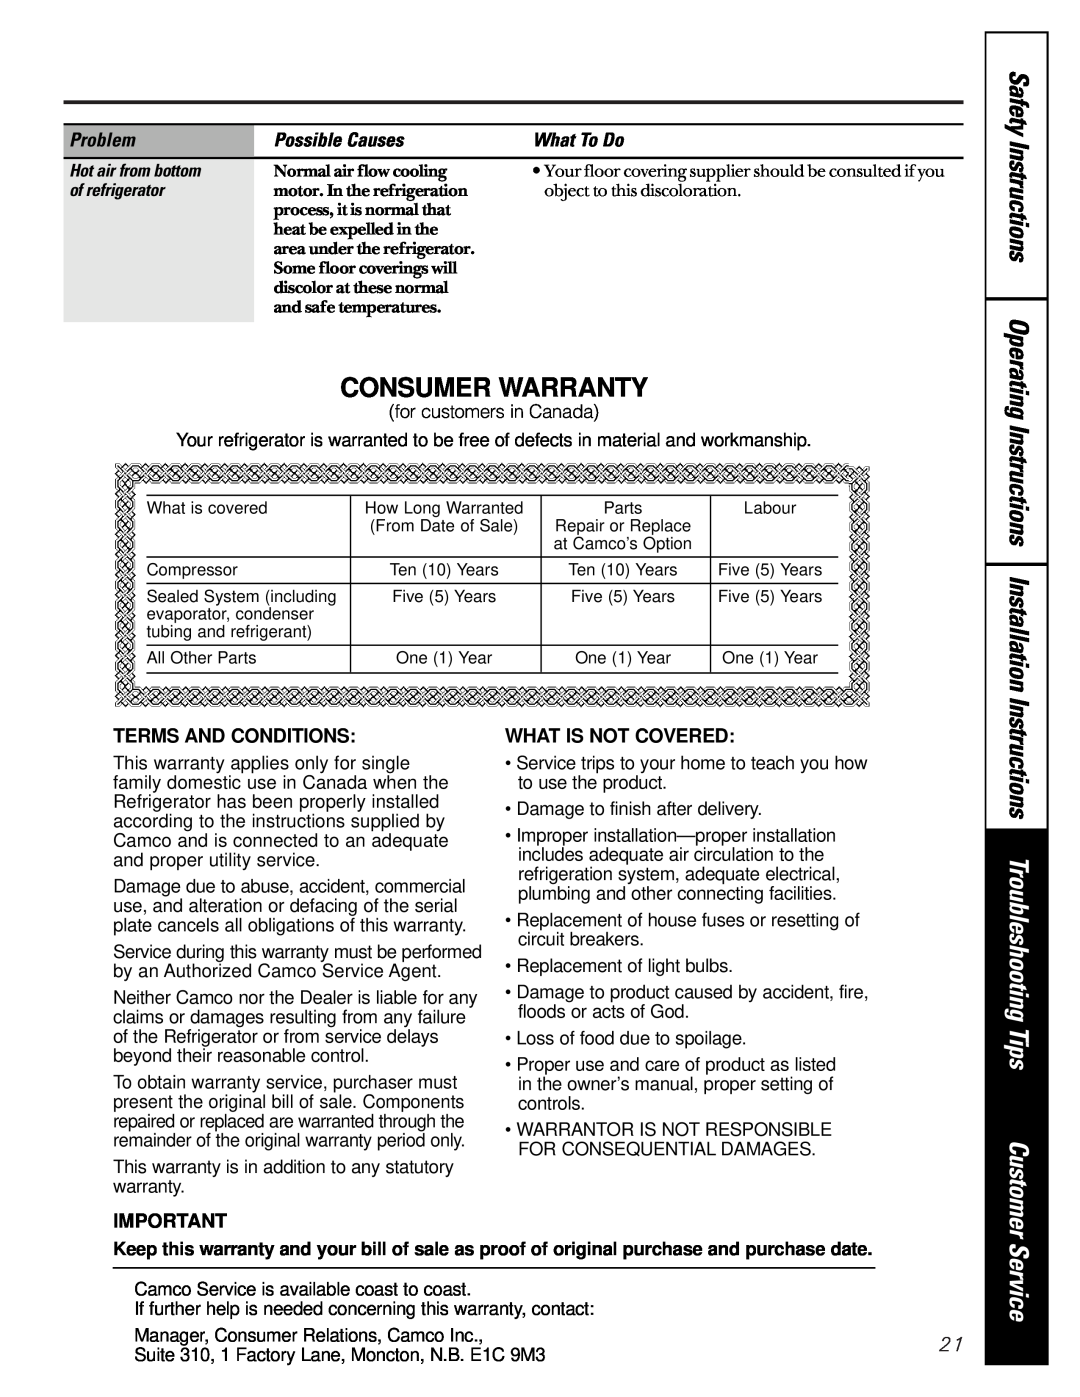 GE 162D6733P007 Consumer Warranty, Service, Safety Instructions Operating Instructions Installation, Terms And Conditions 